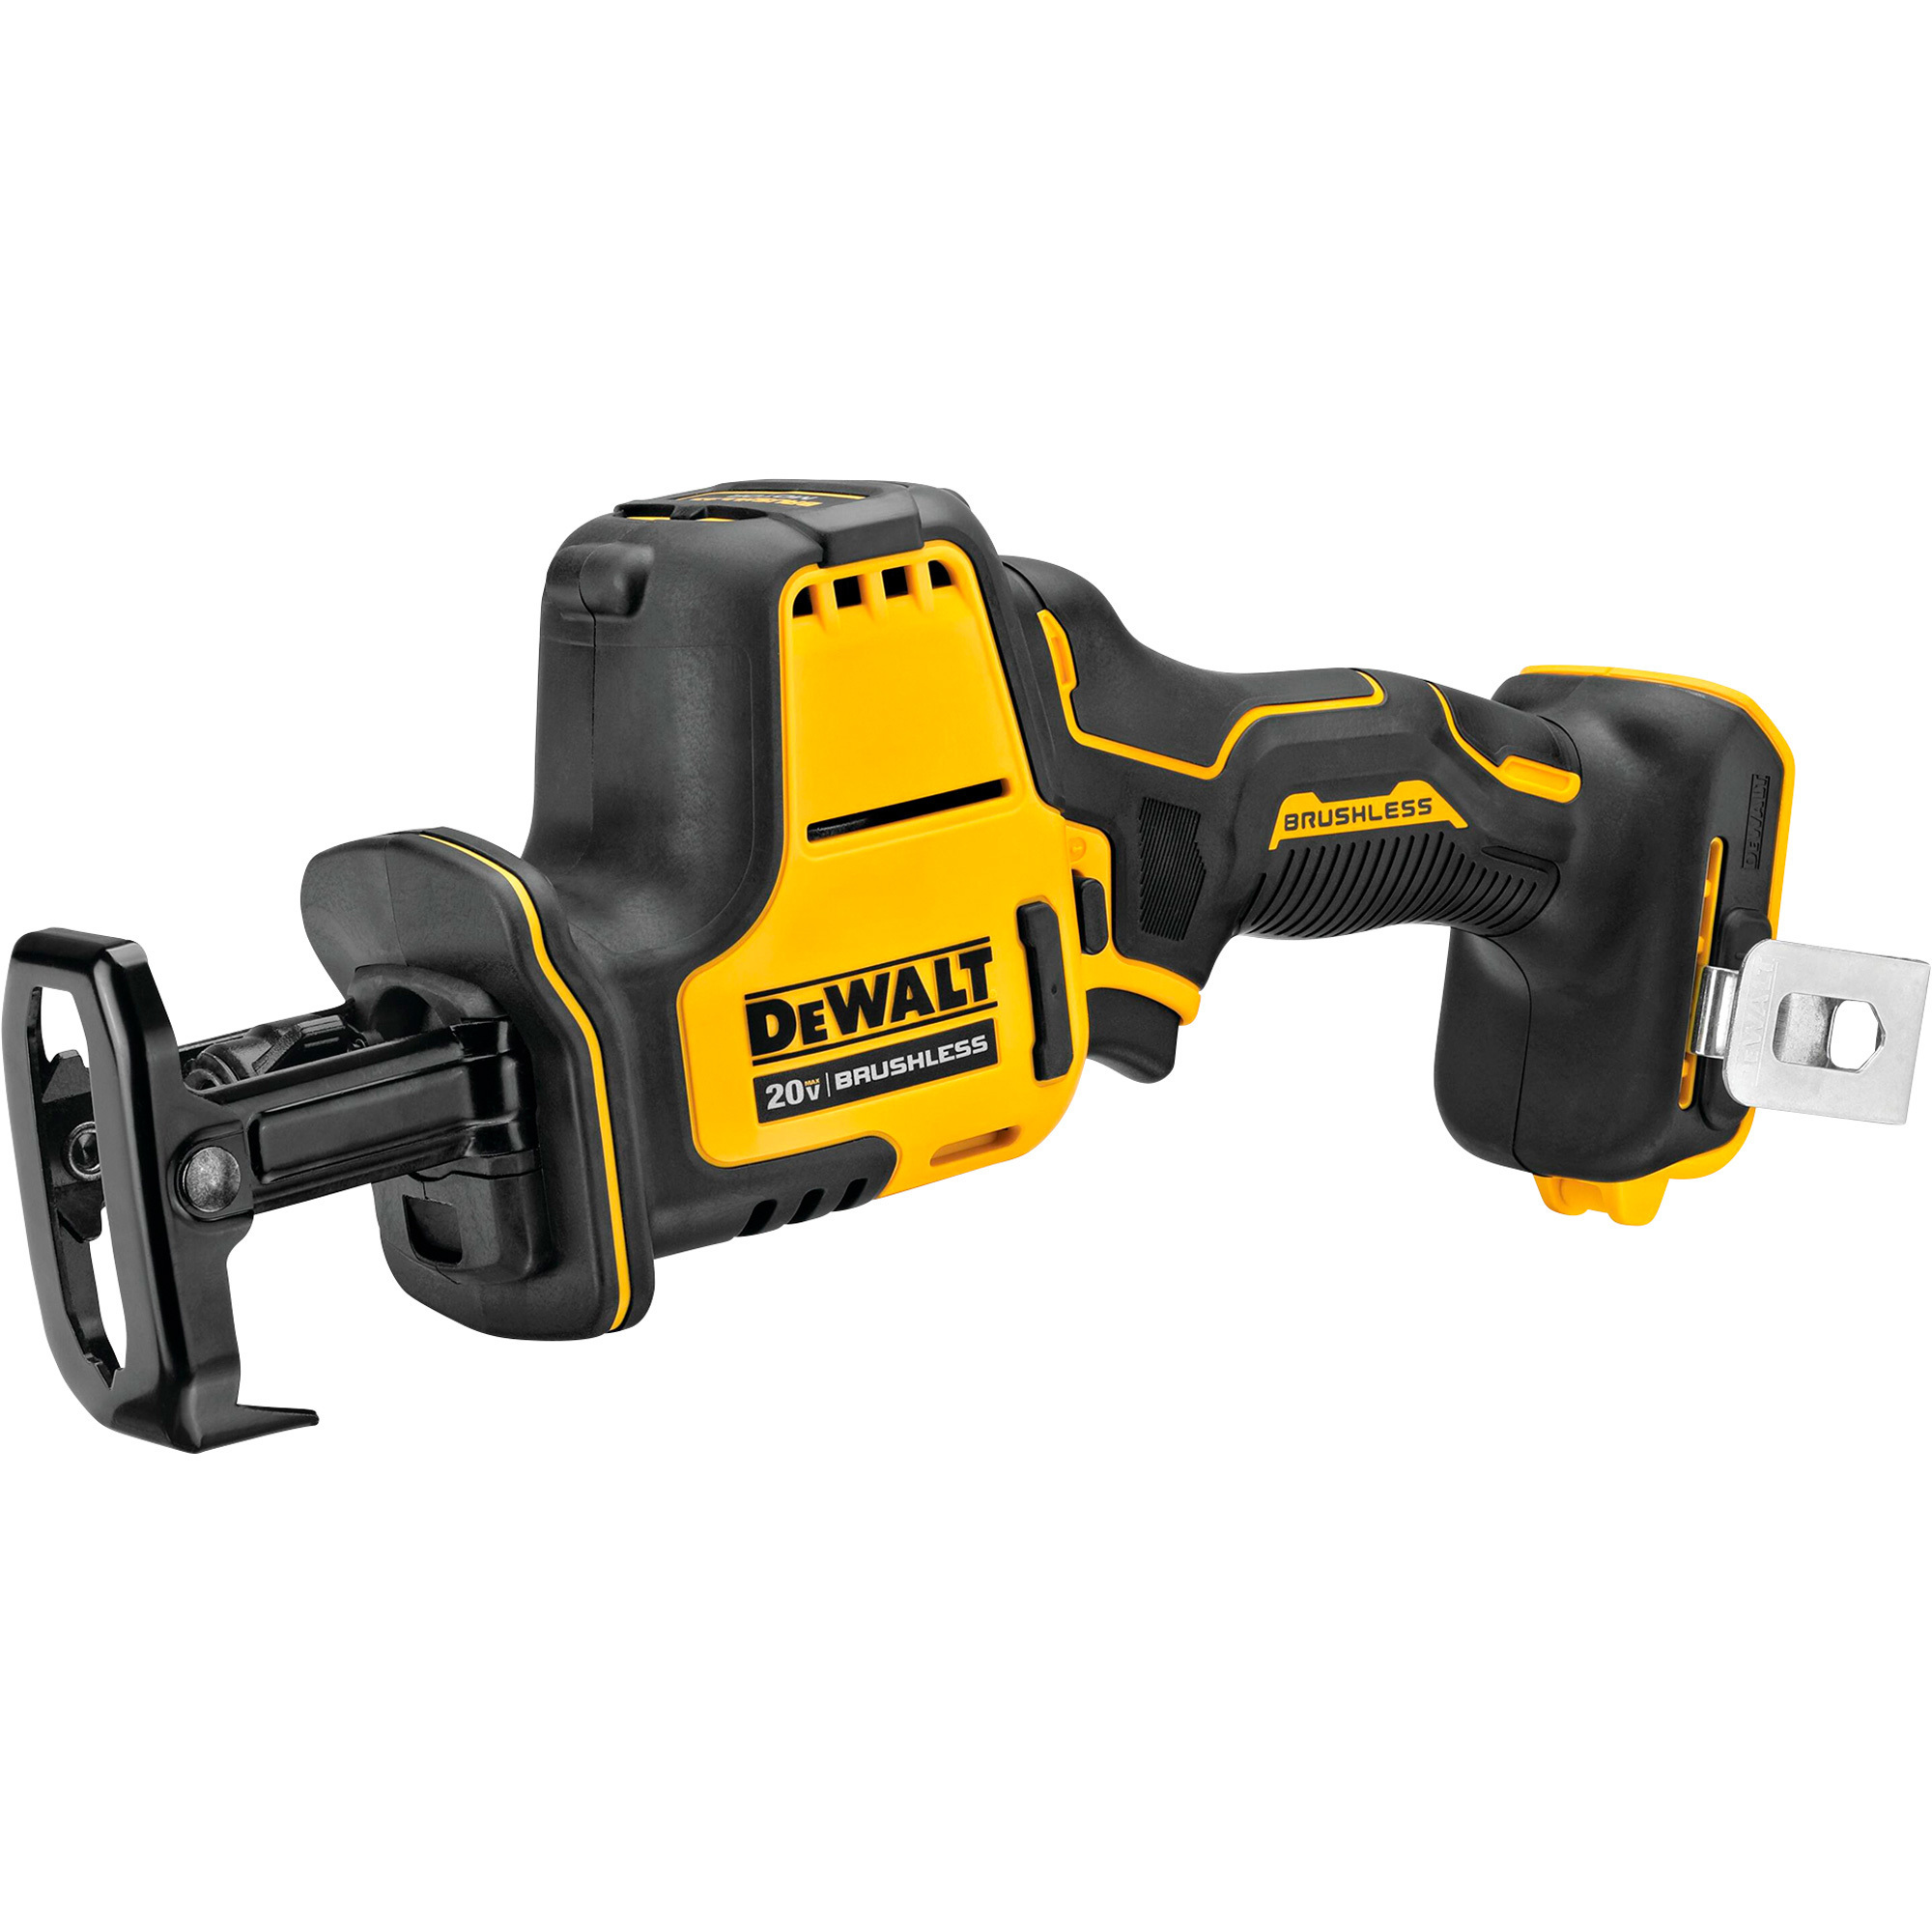 DEWALT 20V MAX* Brushless Cordless One-Handed Reciprocating Saw, Tool Only, Model DCS369B